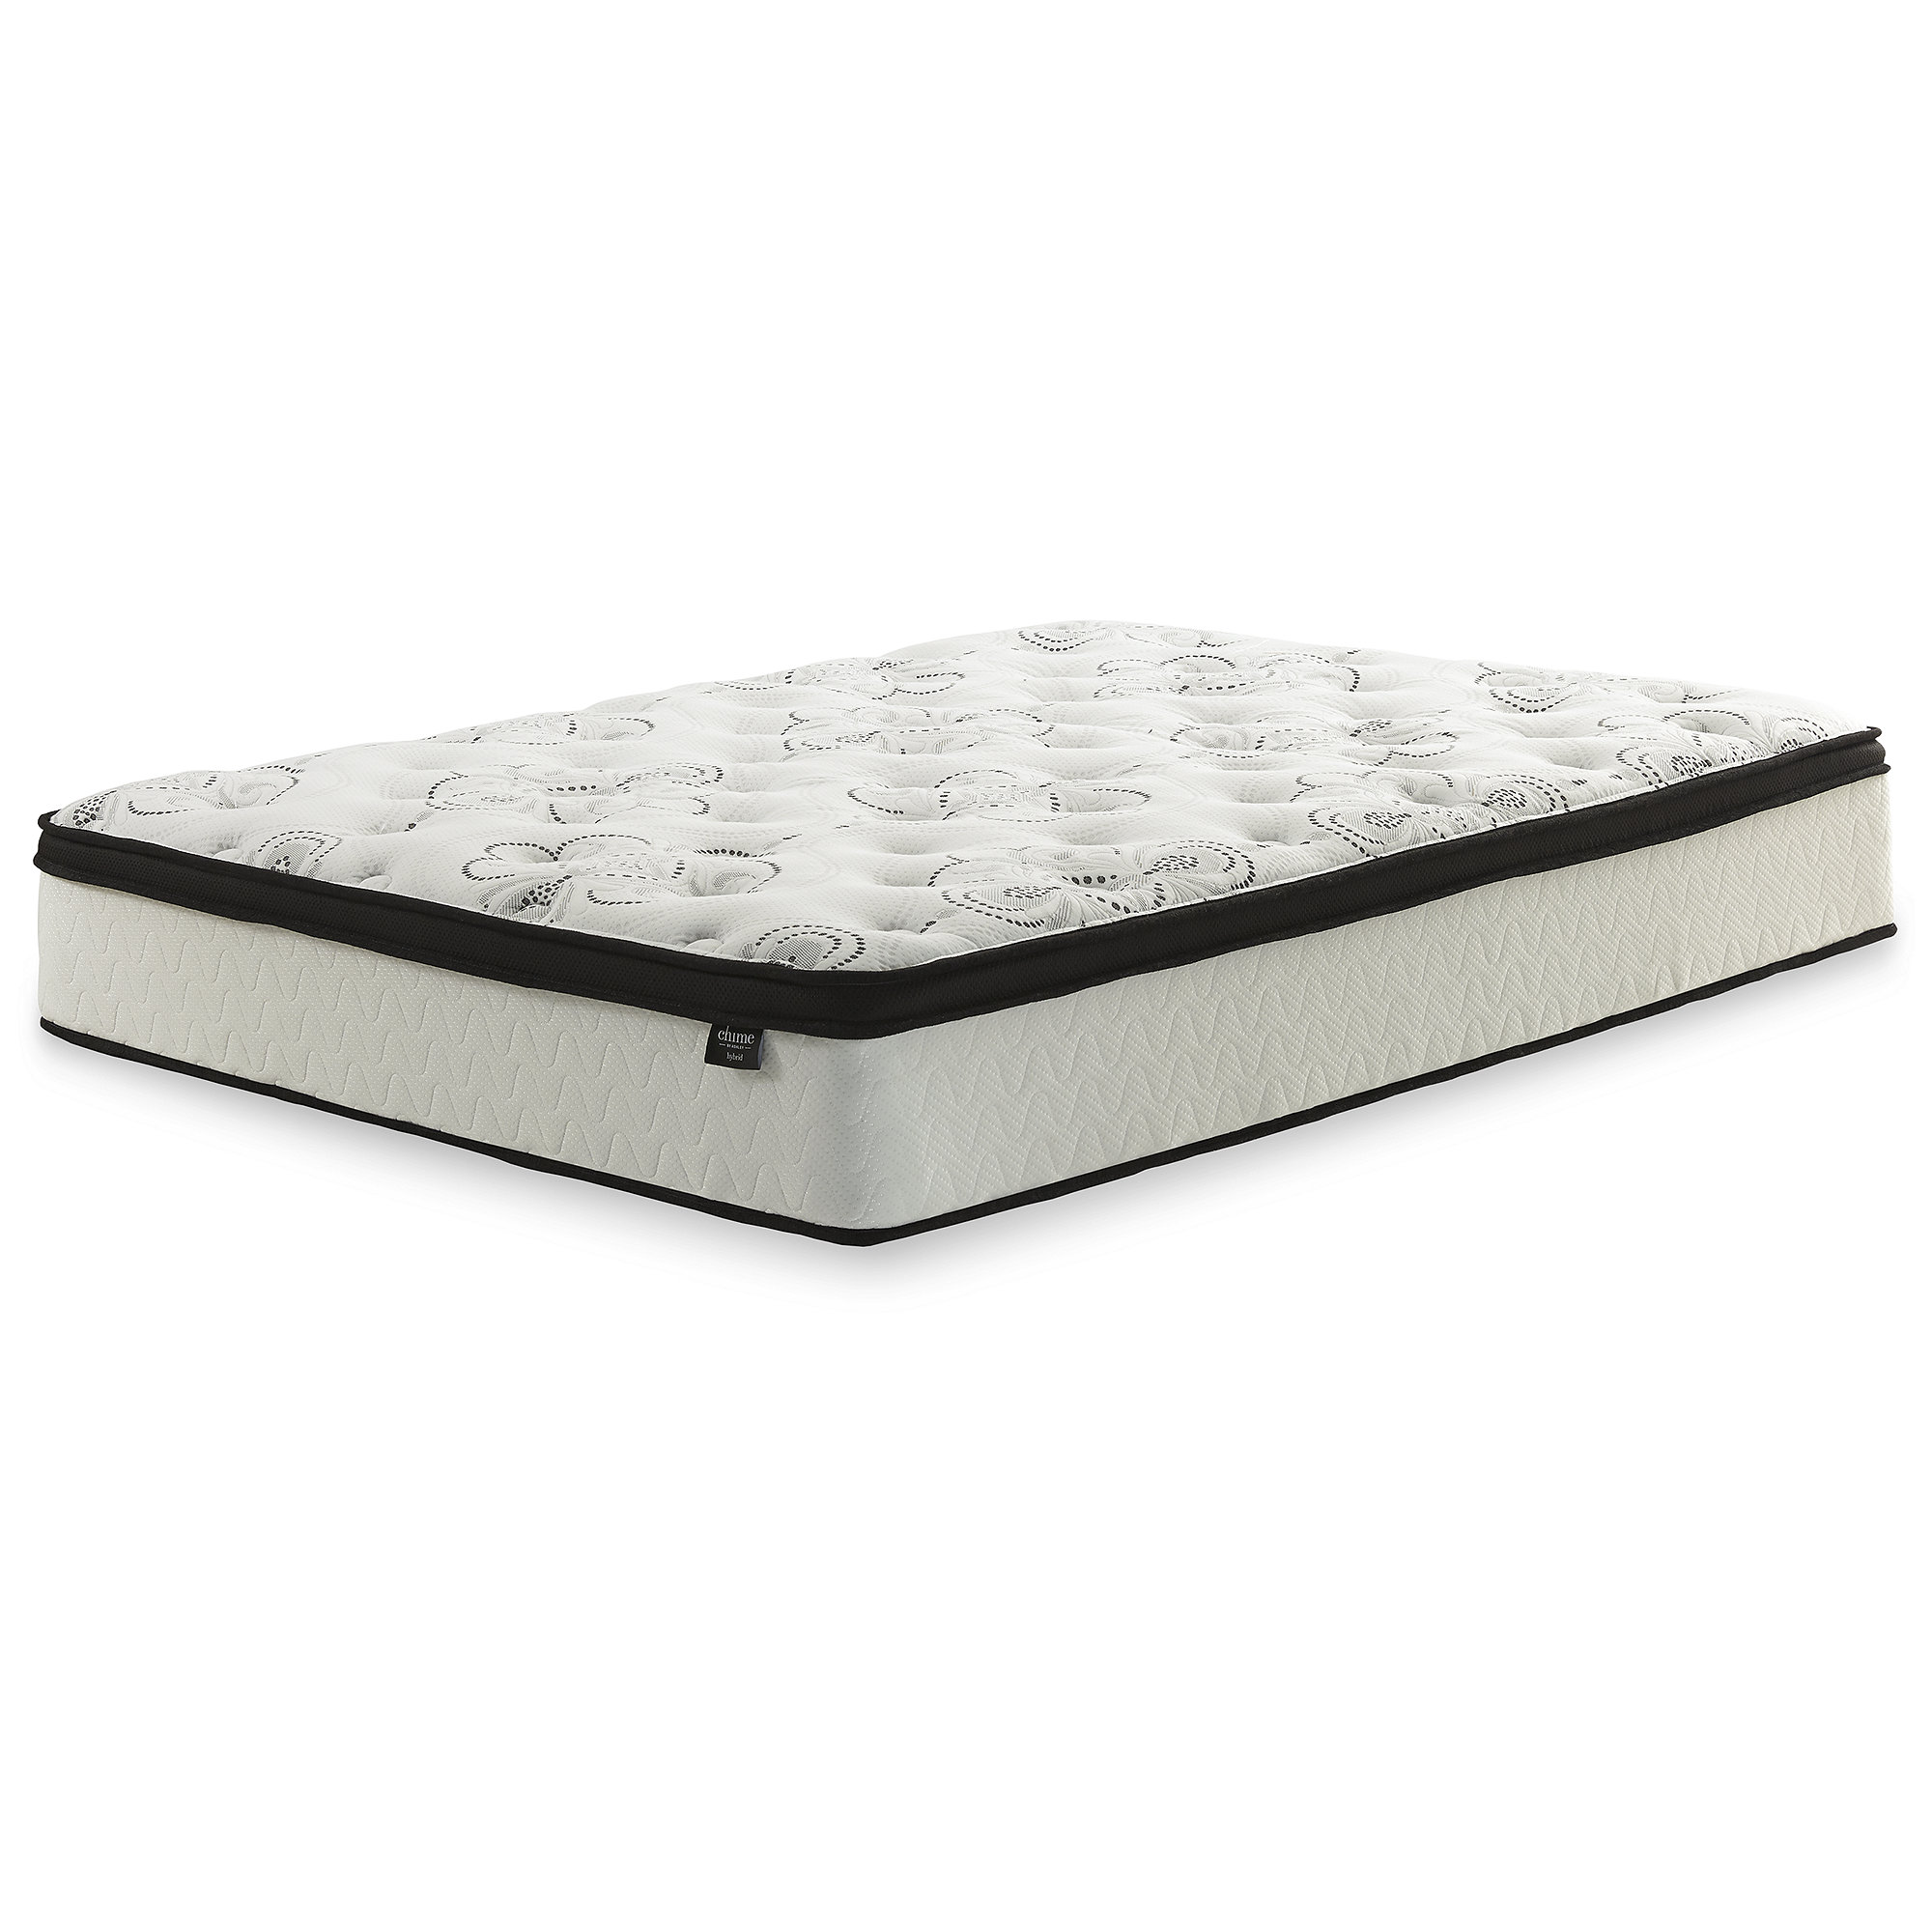 Signature Design by Ashley  Chime 12 Inch Hybrid King Mattress in a Box  White - image 6 of 9